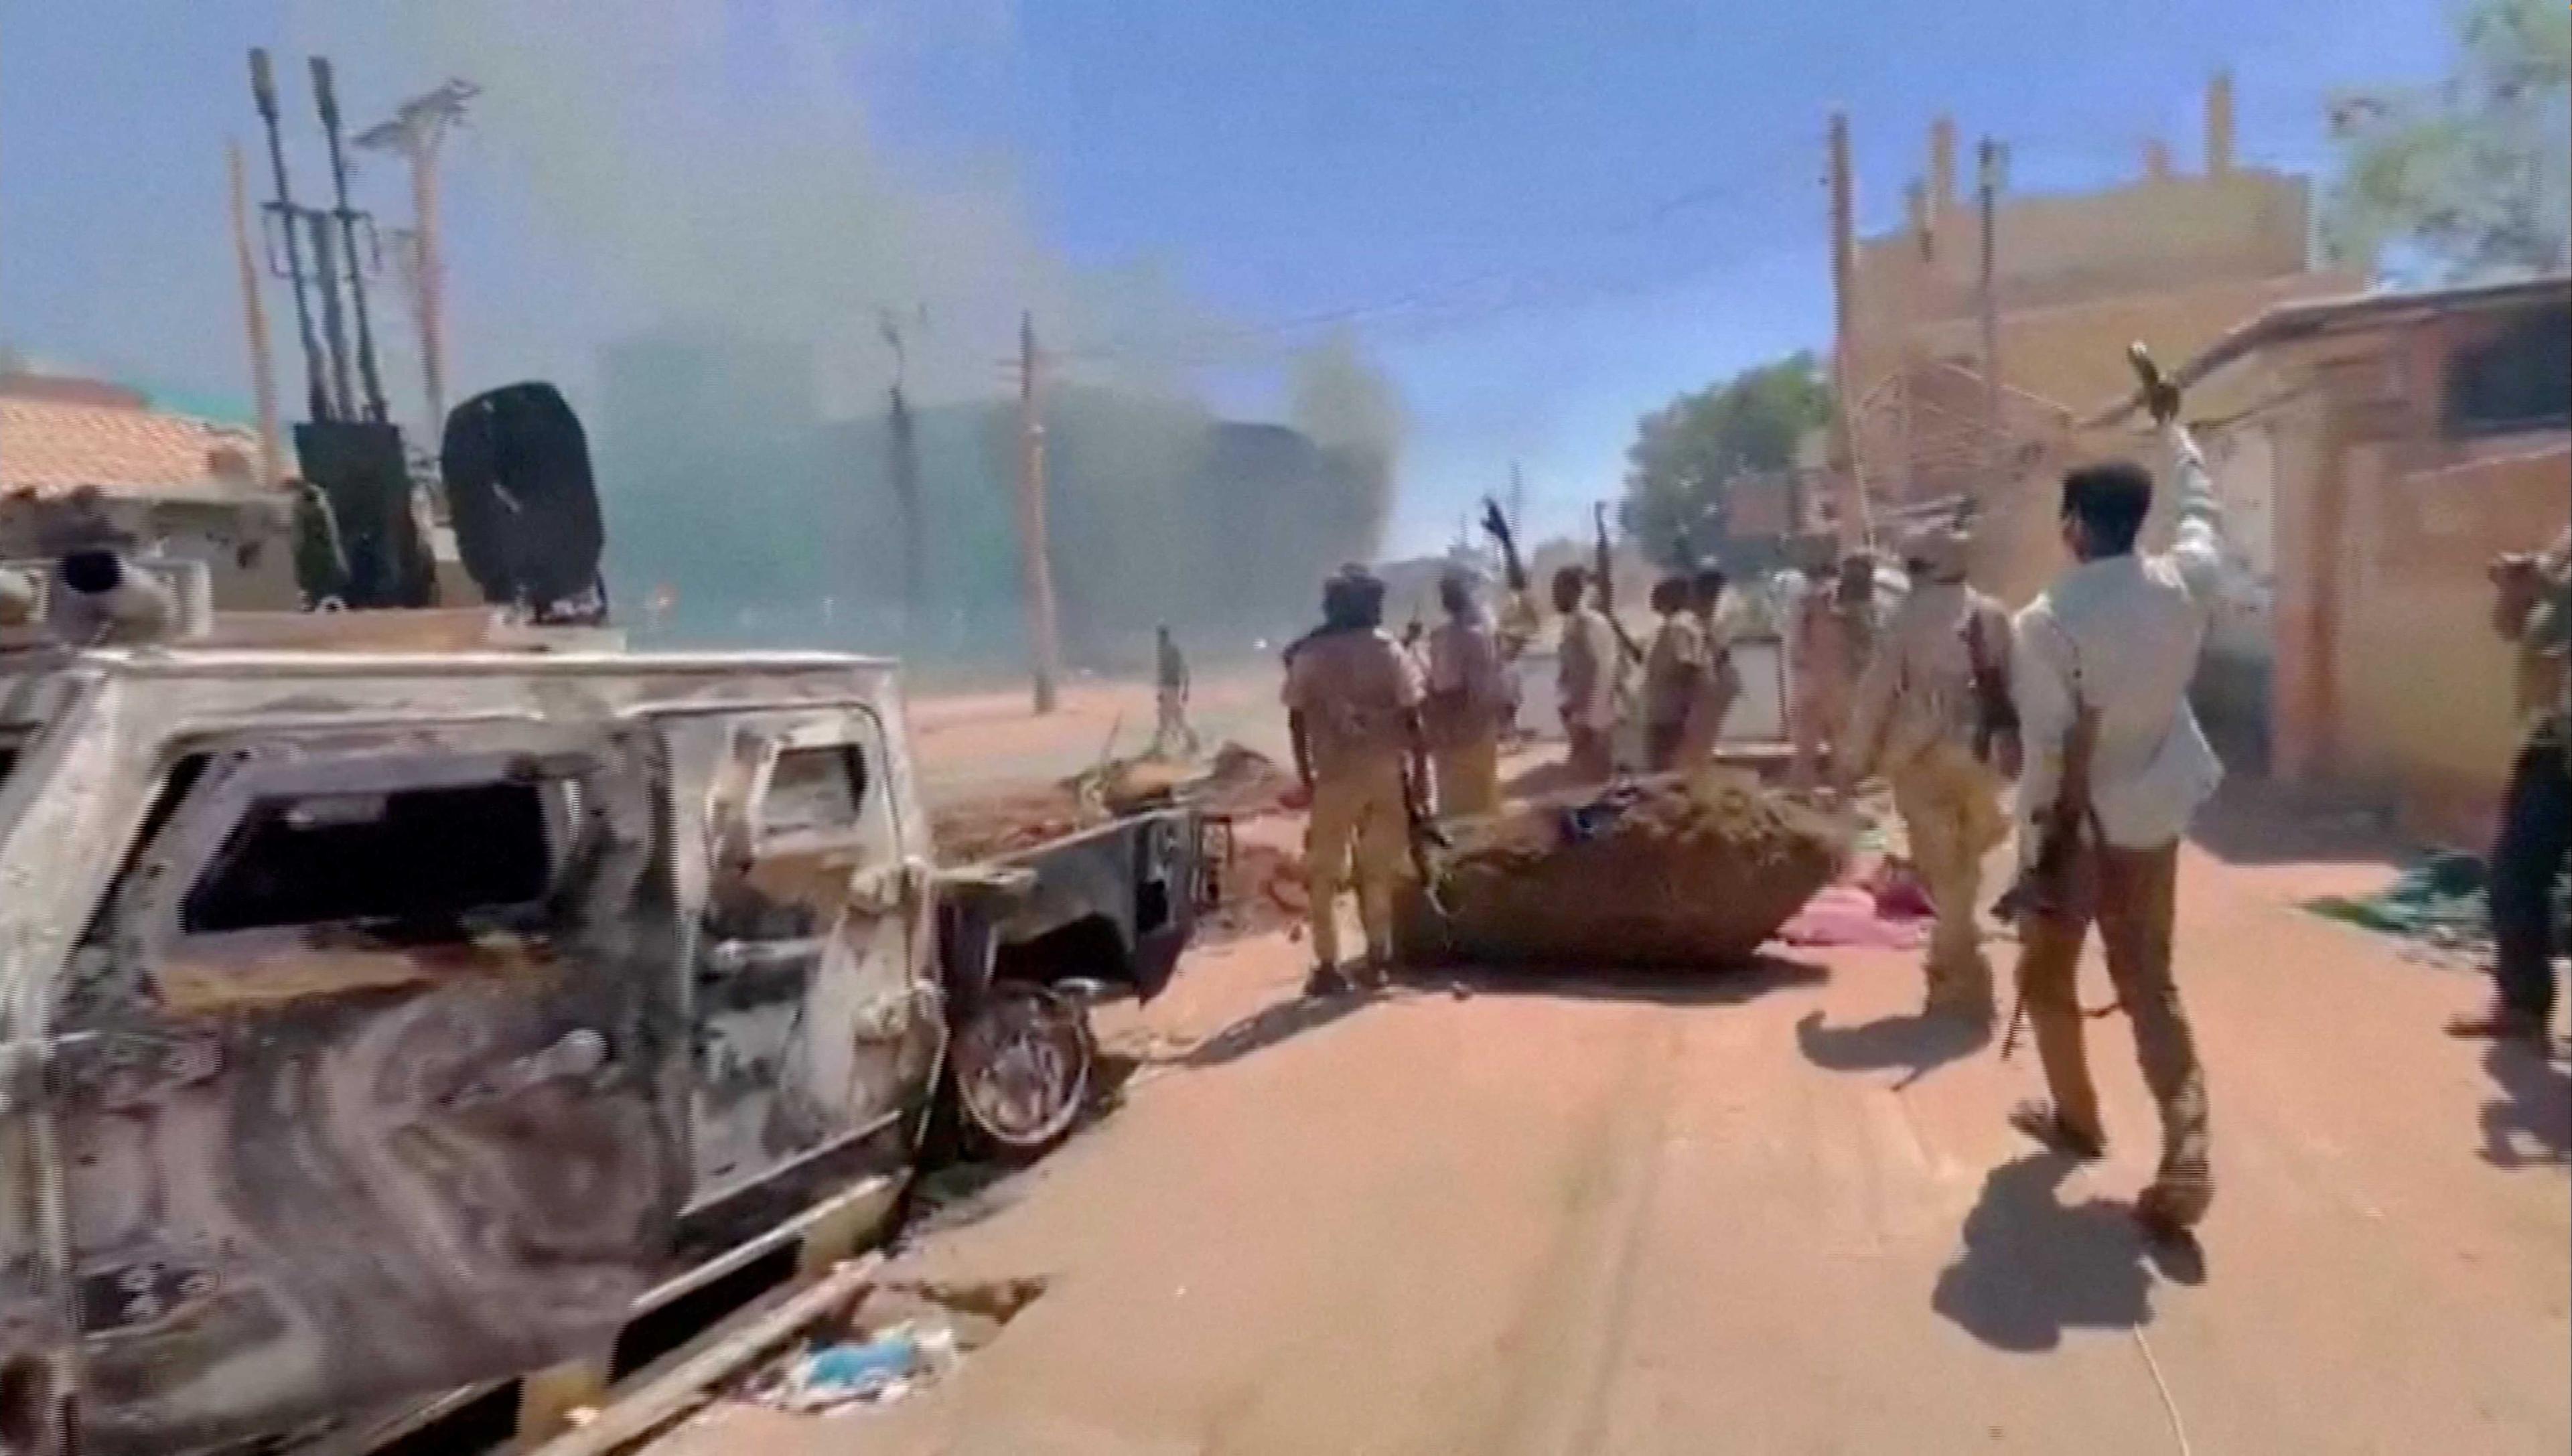 RSF fighters stand near the damaged Air Defence Forces command centre in Khartoum, Sudan May 17, in this screen grab obtained from a social media video. Photo: Reuters